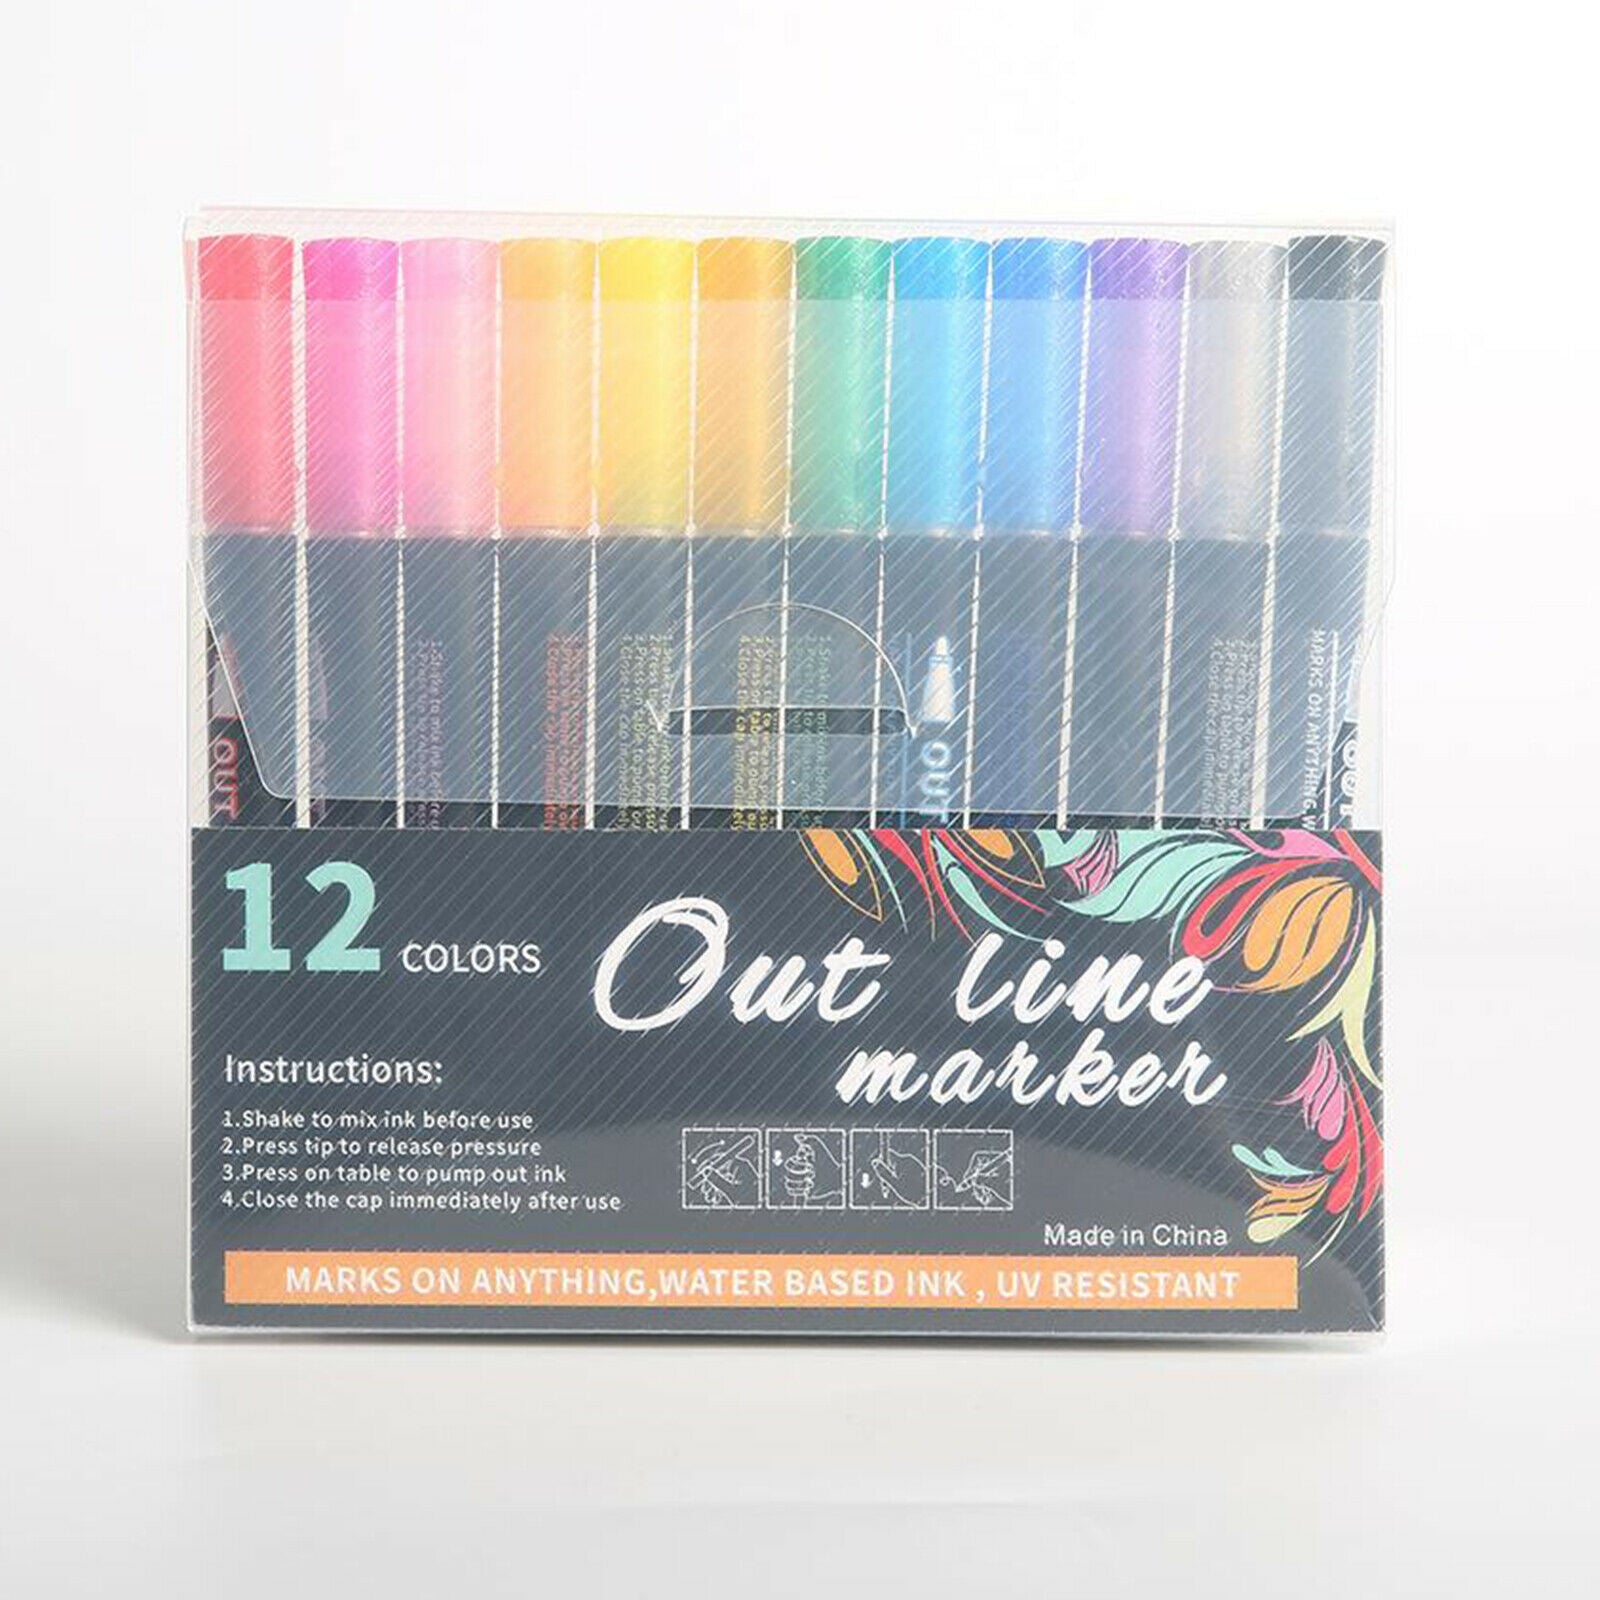 Double Line Outline Pens, 12 Colors Self-Outline Metallic Markers Glitter